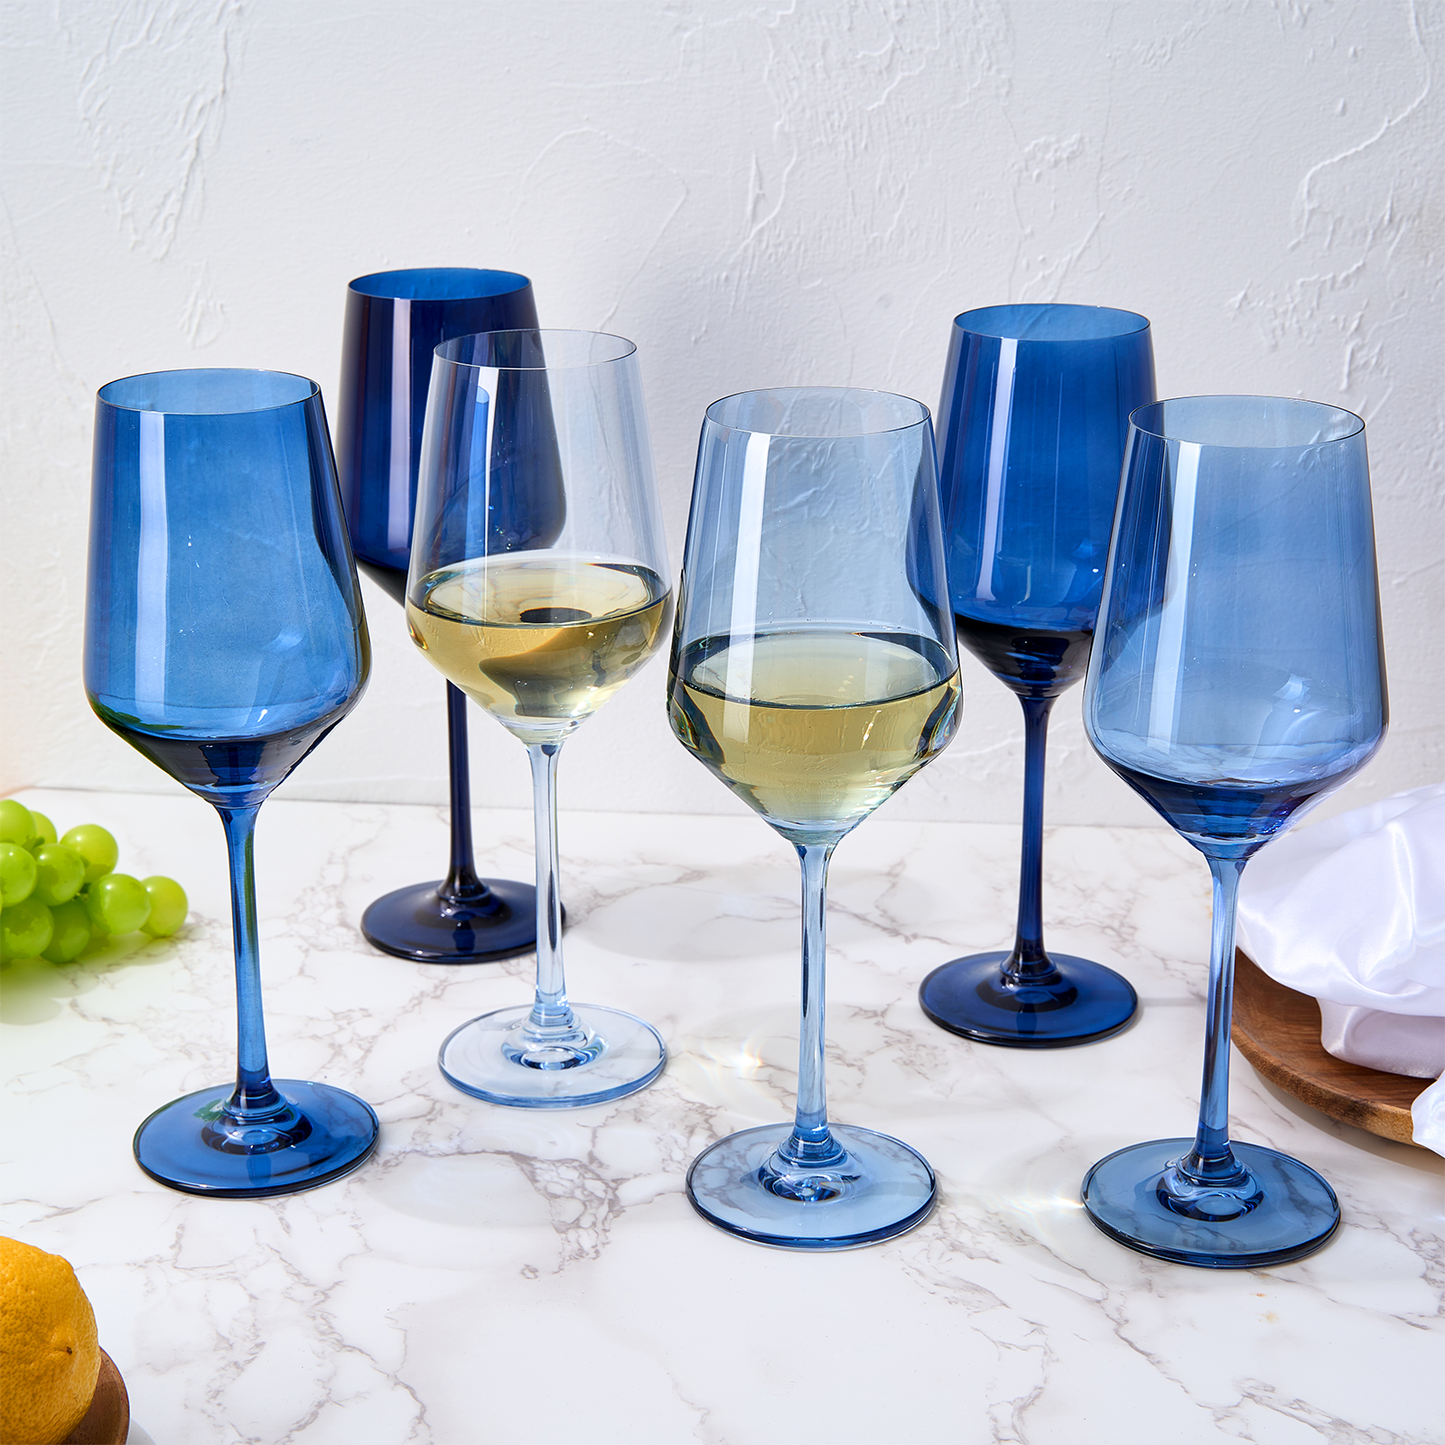 Colored Wine Glass Set, 12oz Glasses Set of 6 For All Occasions & Special Celebrations Gift For Him, Her, Wife, Friend Drinkware Unique Style Tall Stemmed for White & Red Wine Elegant Glassware (Blue)-2